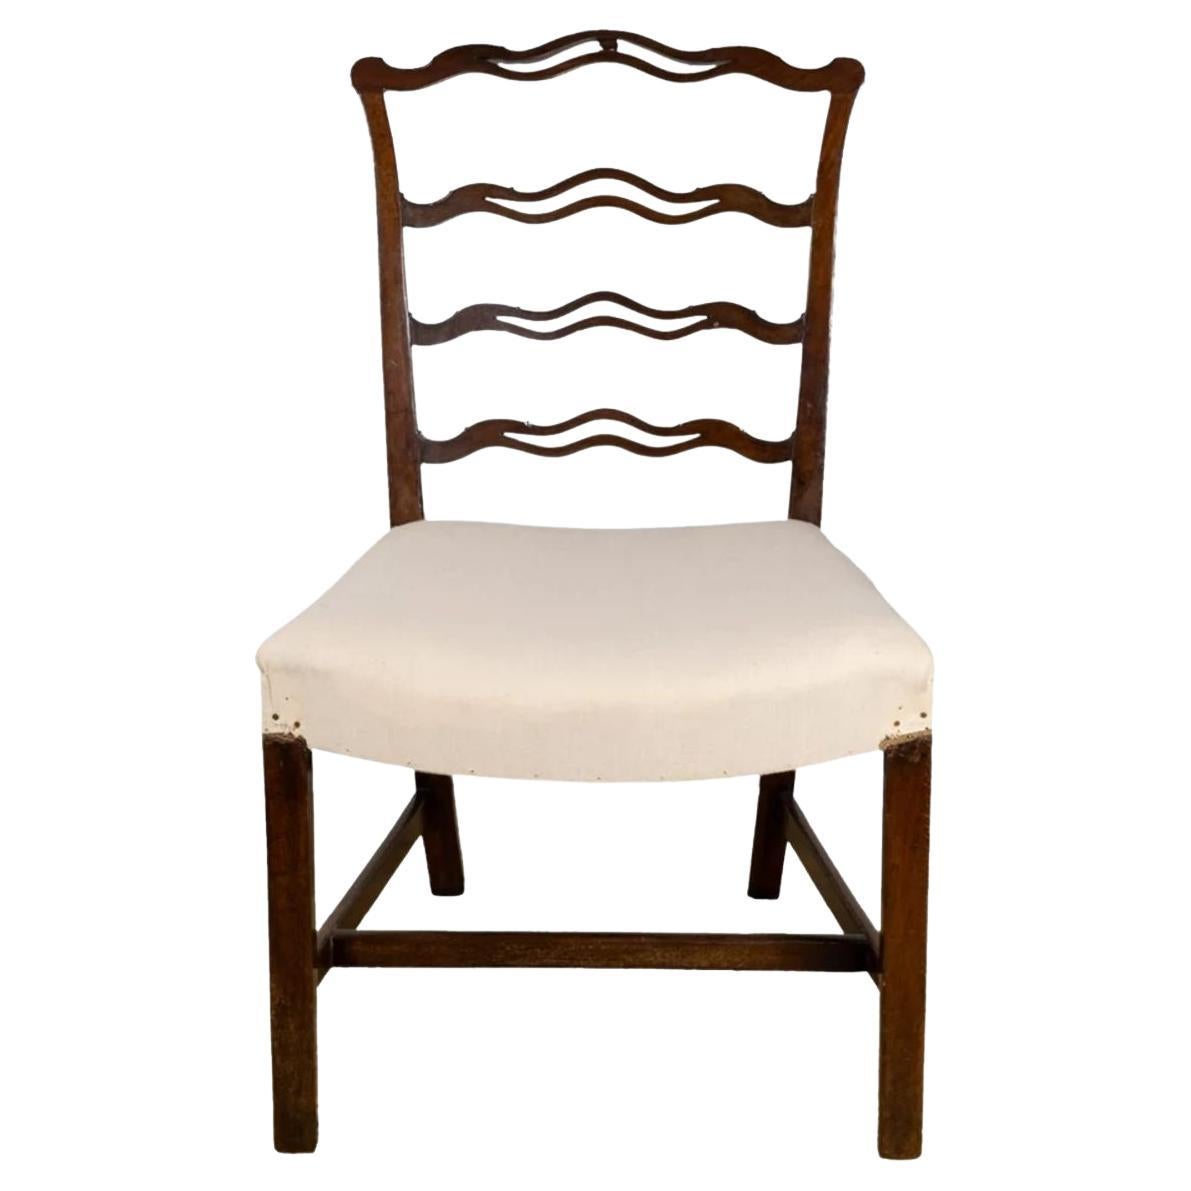 Chippendale Period Ribbon Back Side Chair, circa 1780